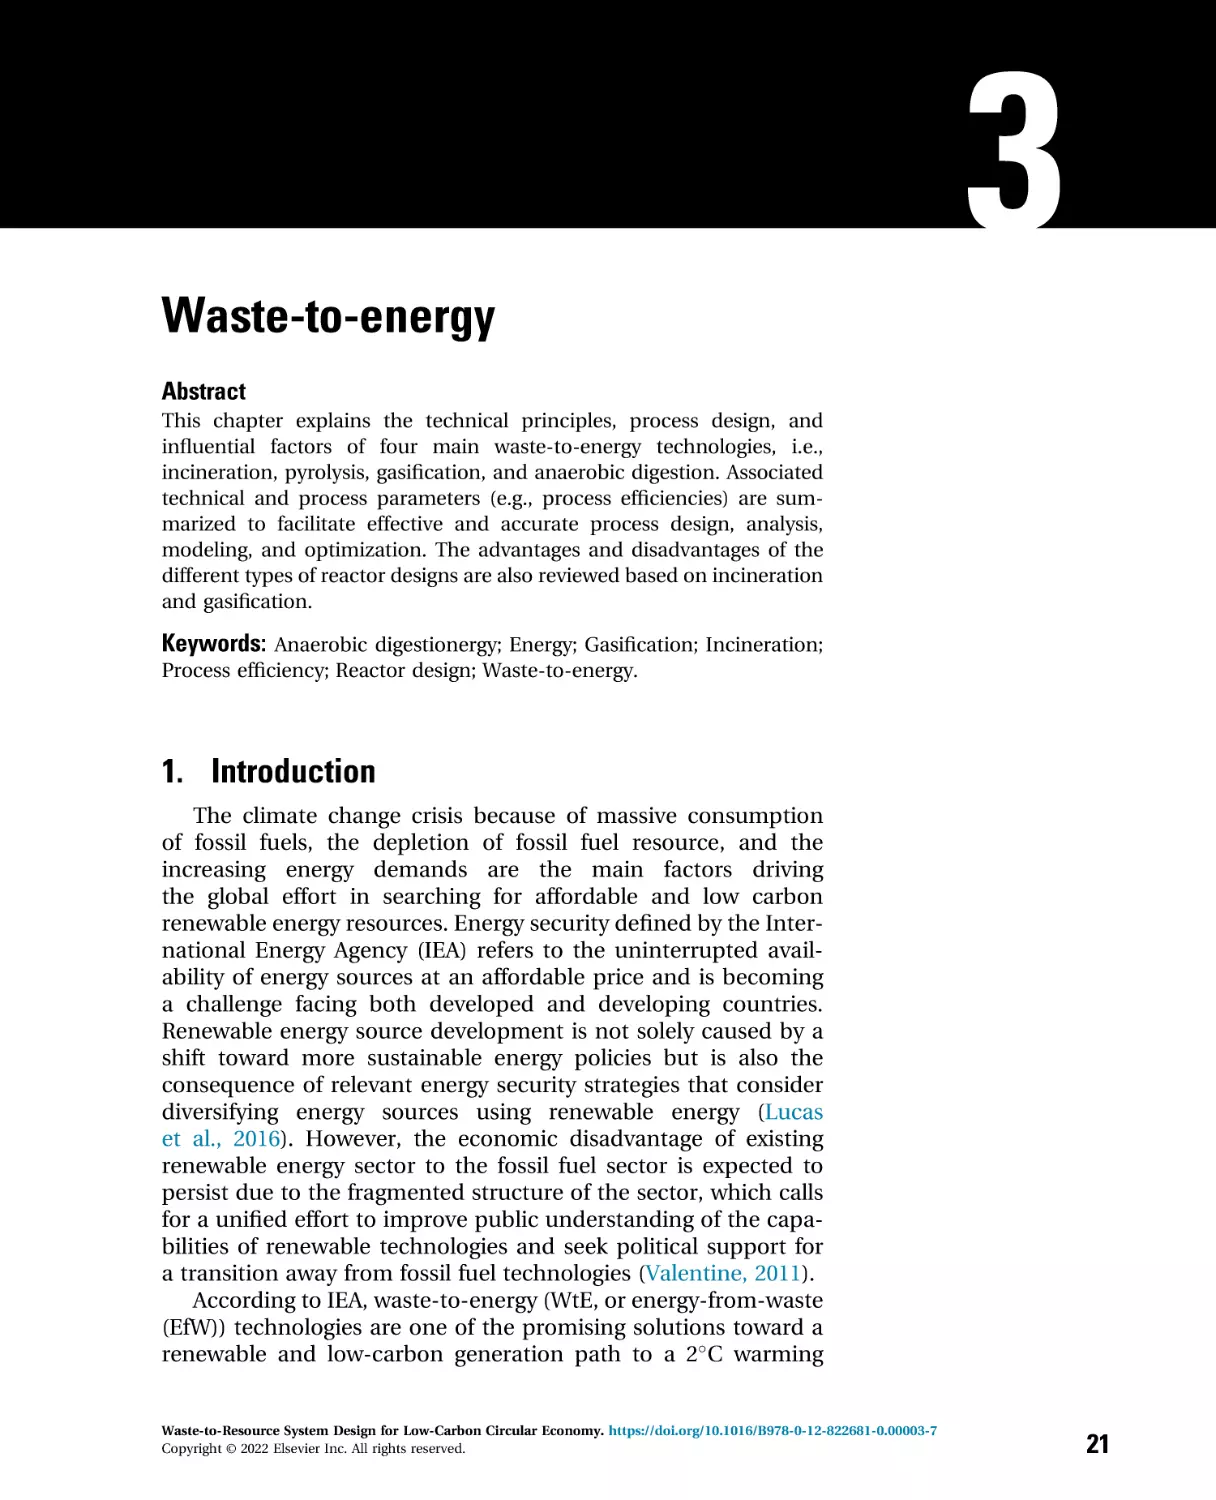 3 - Waste-to-energy
1. Introduction